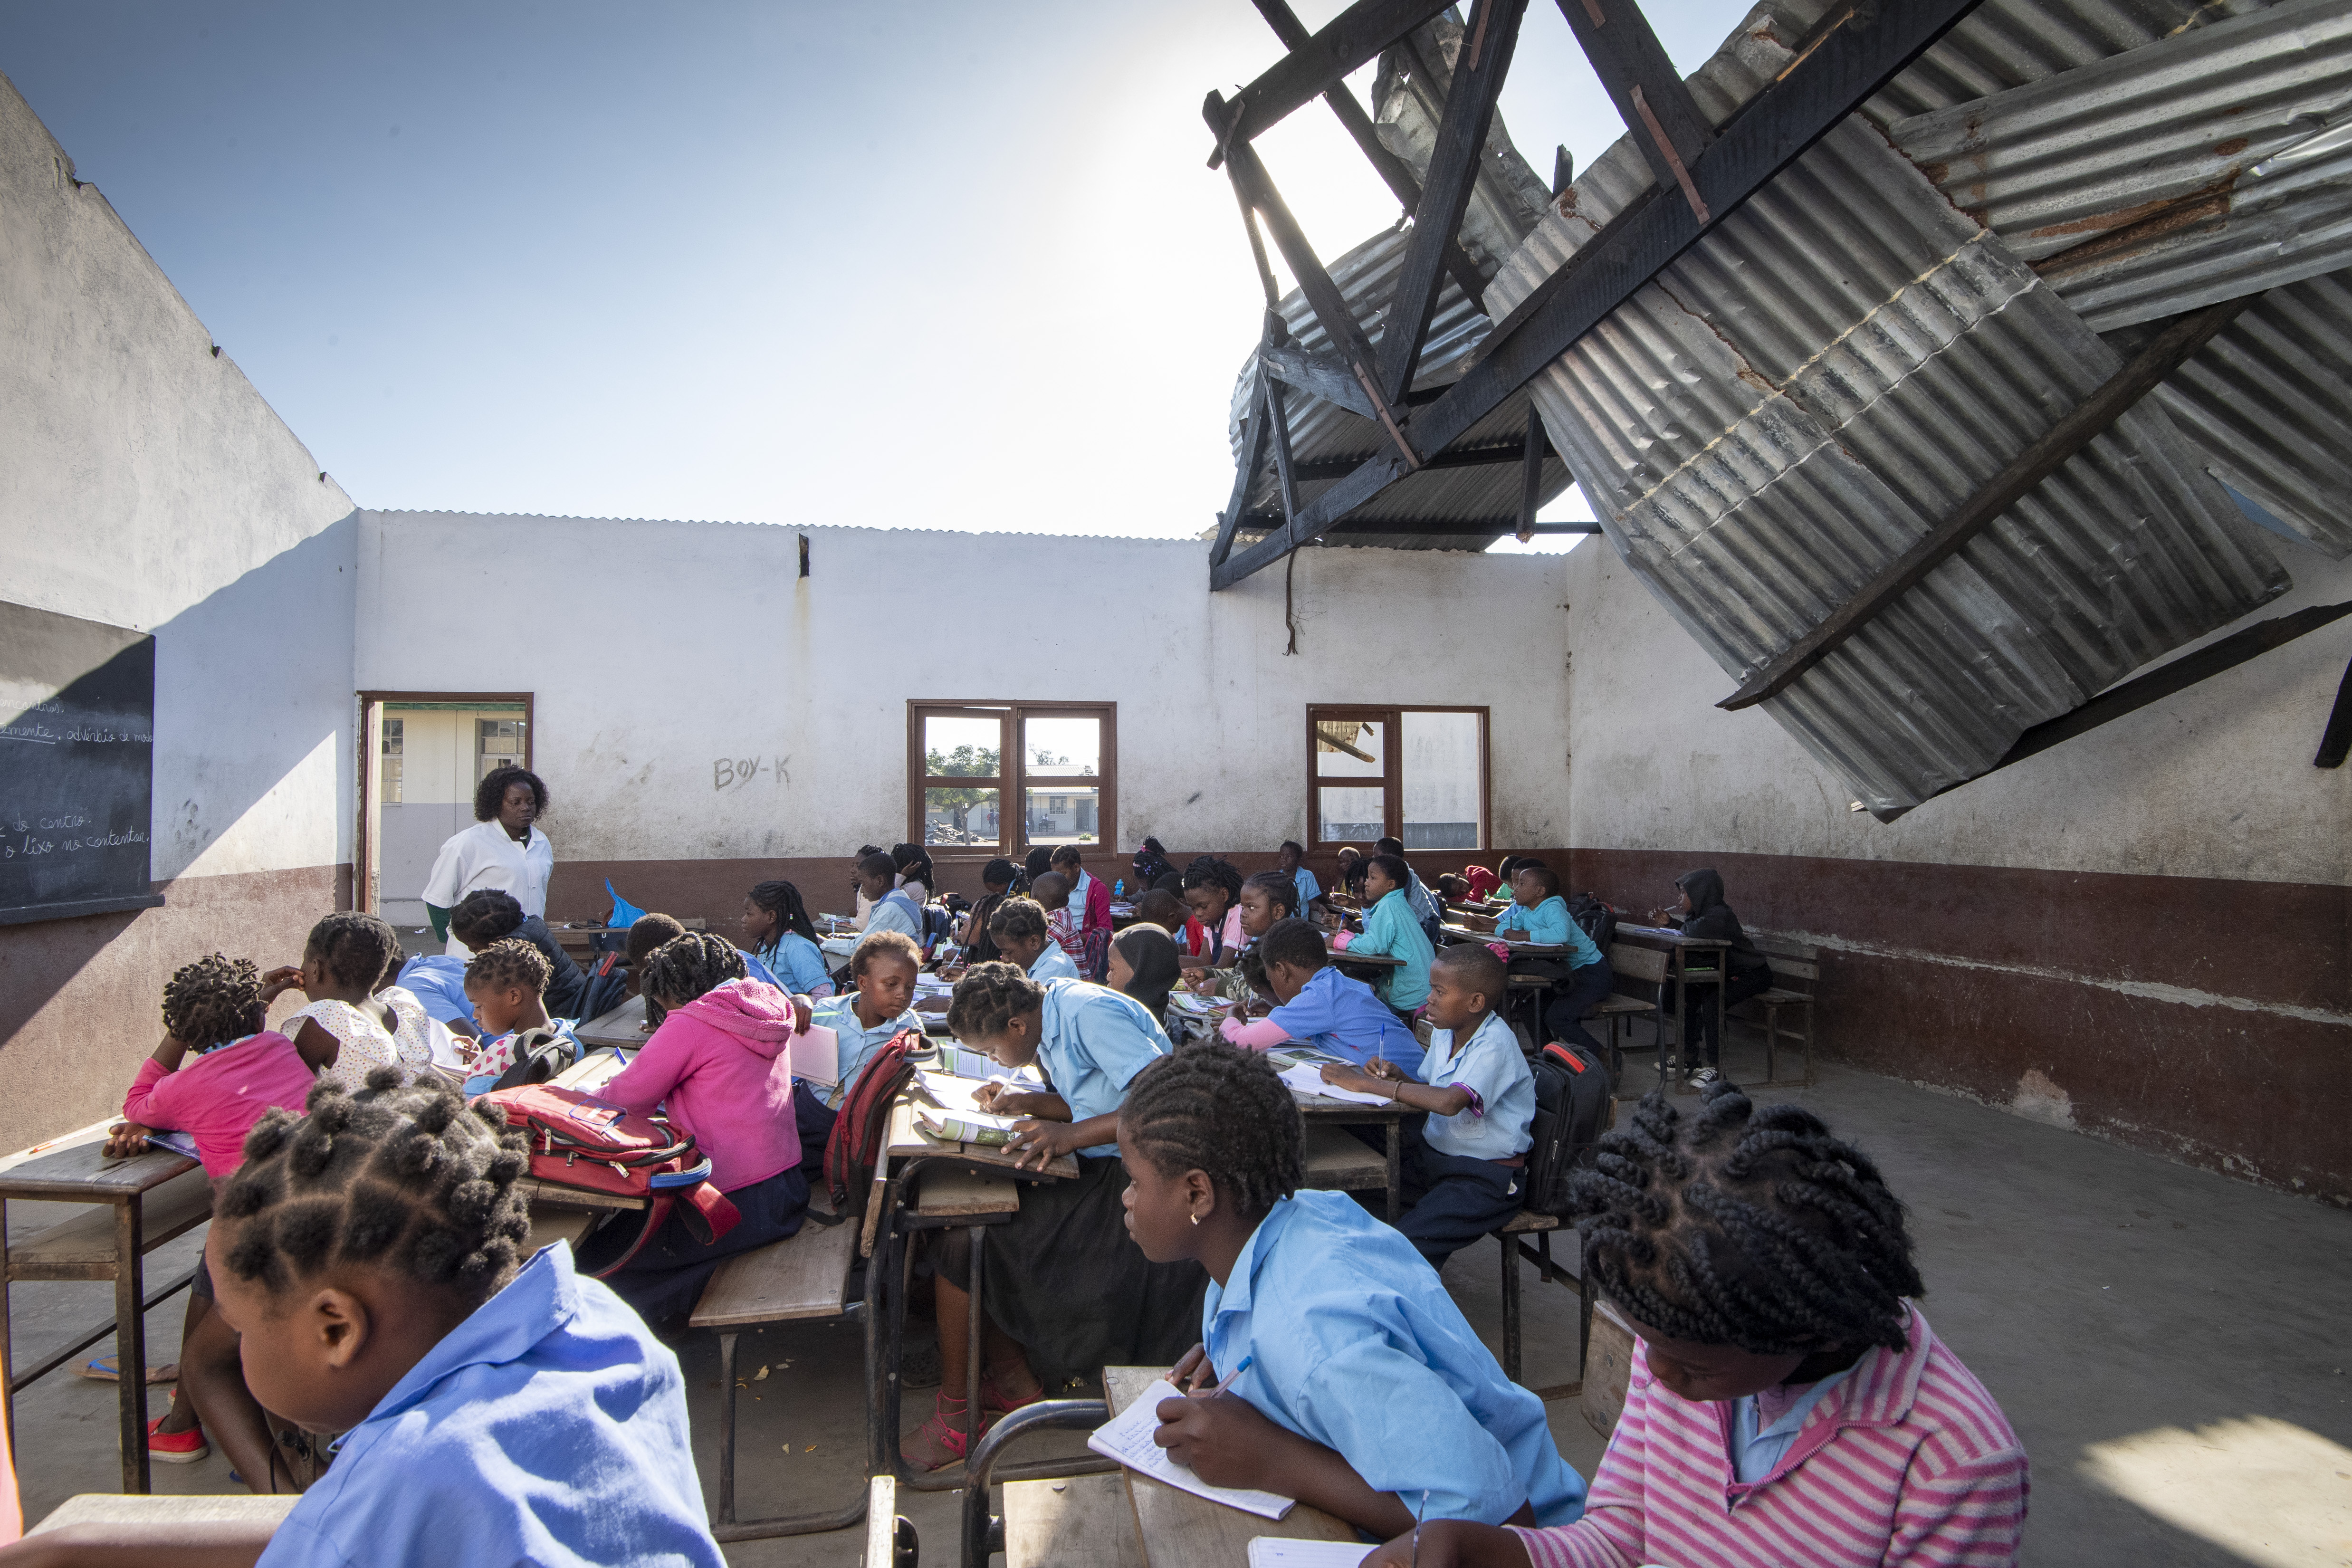 Children learn in a school with no roof